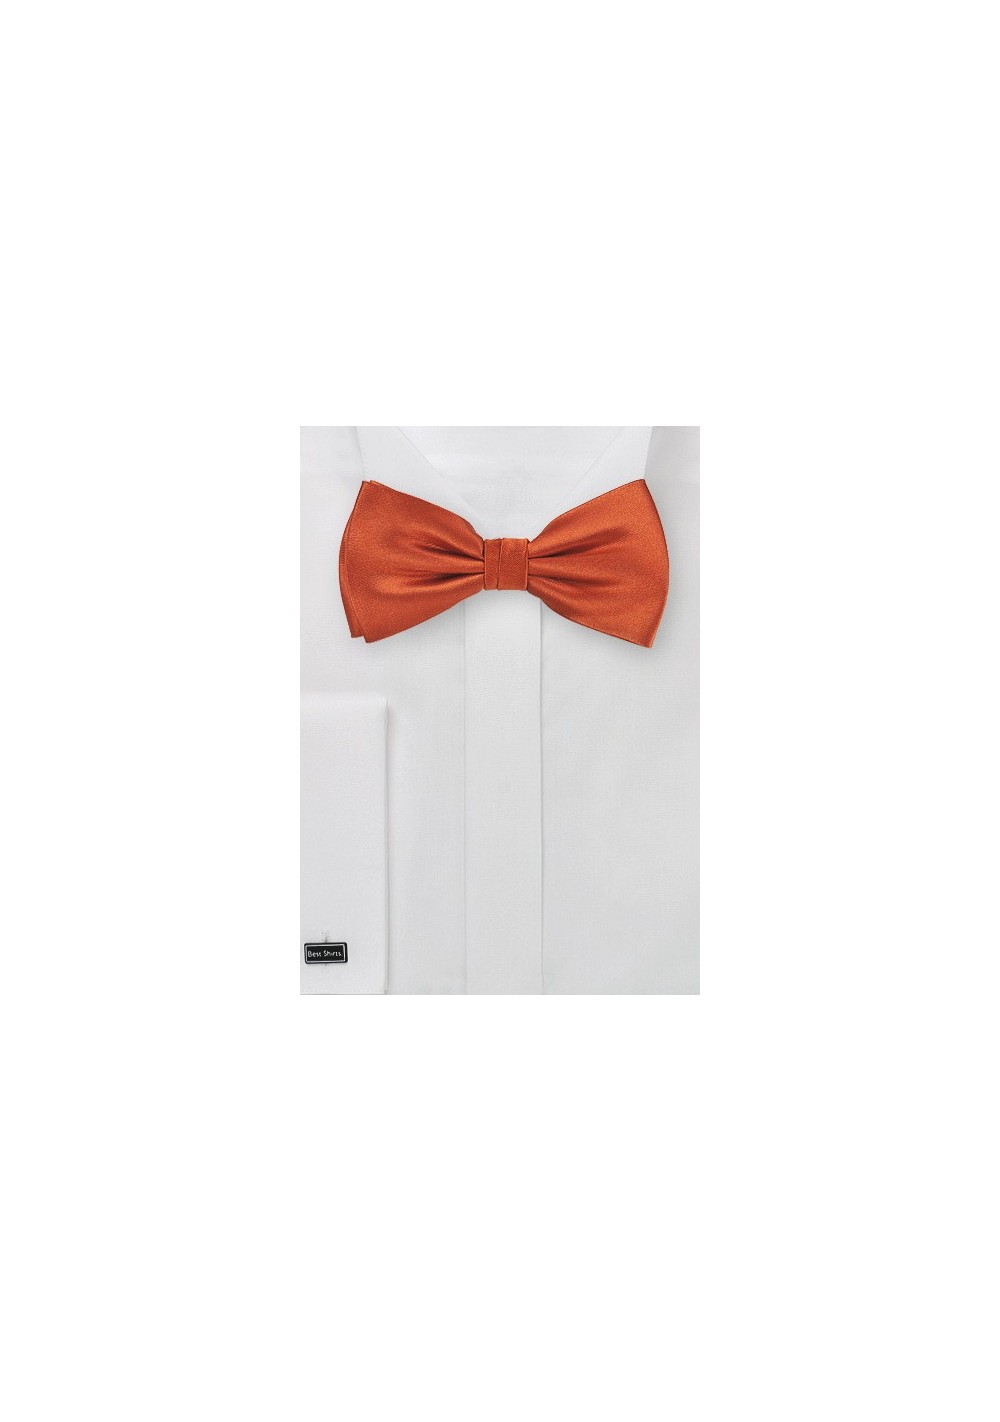 Dark Coral Red Bow Tie